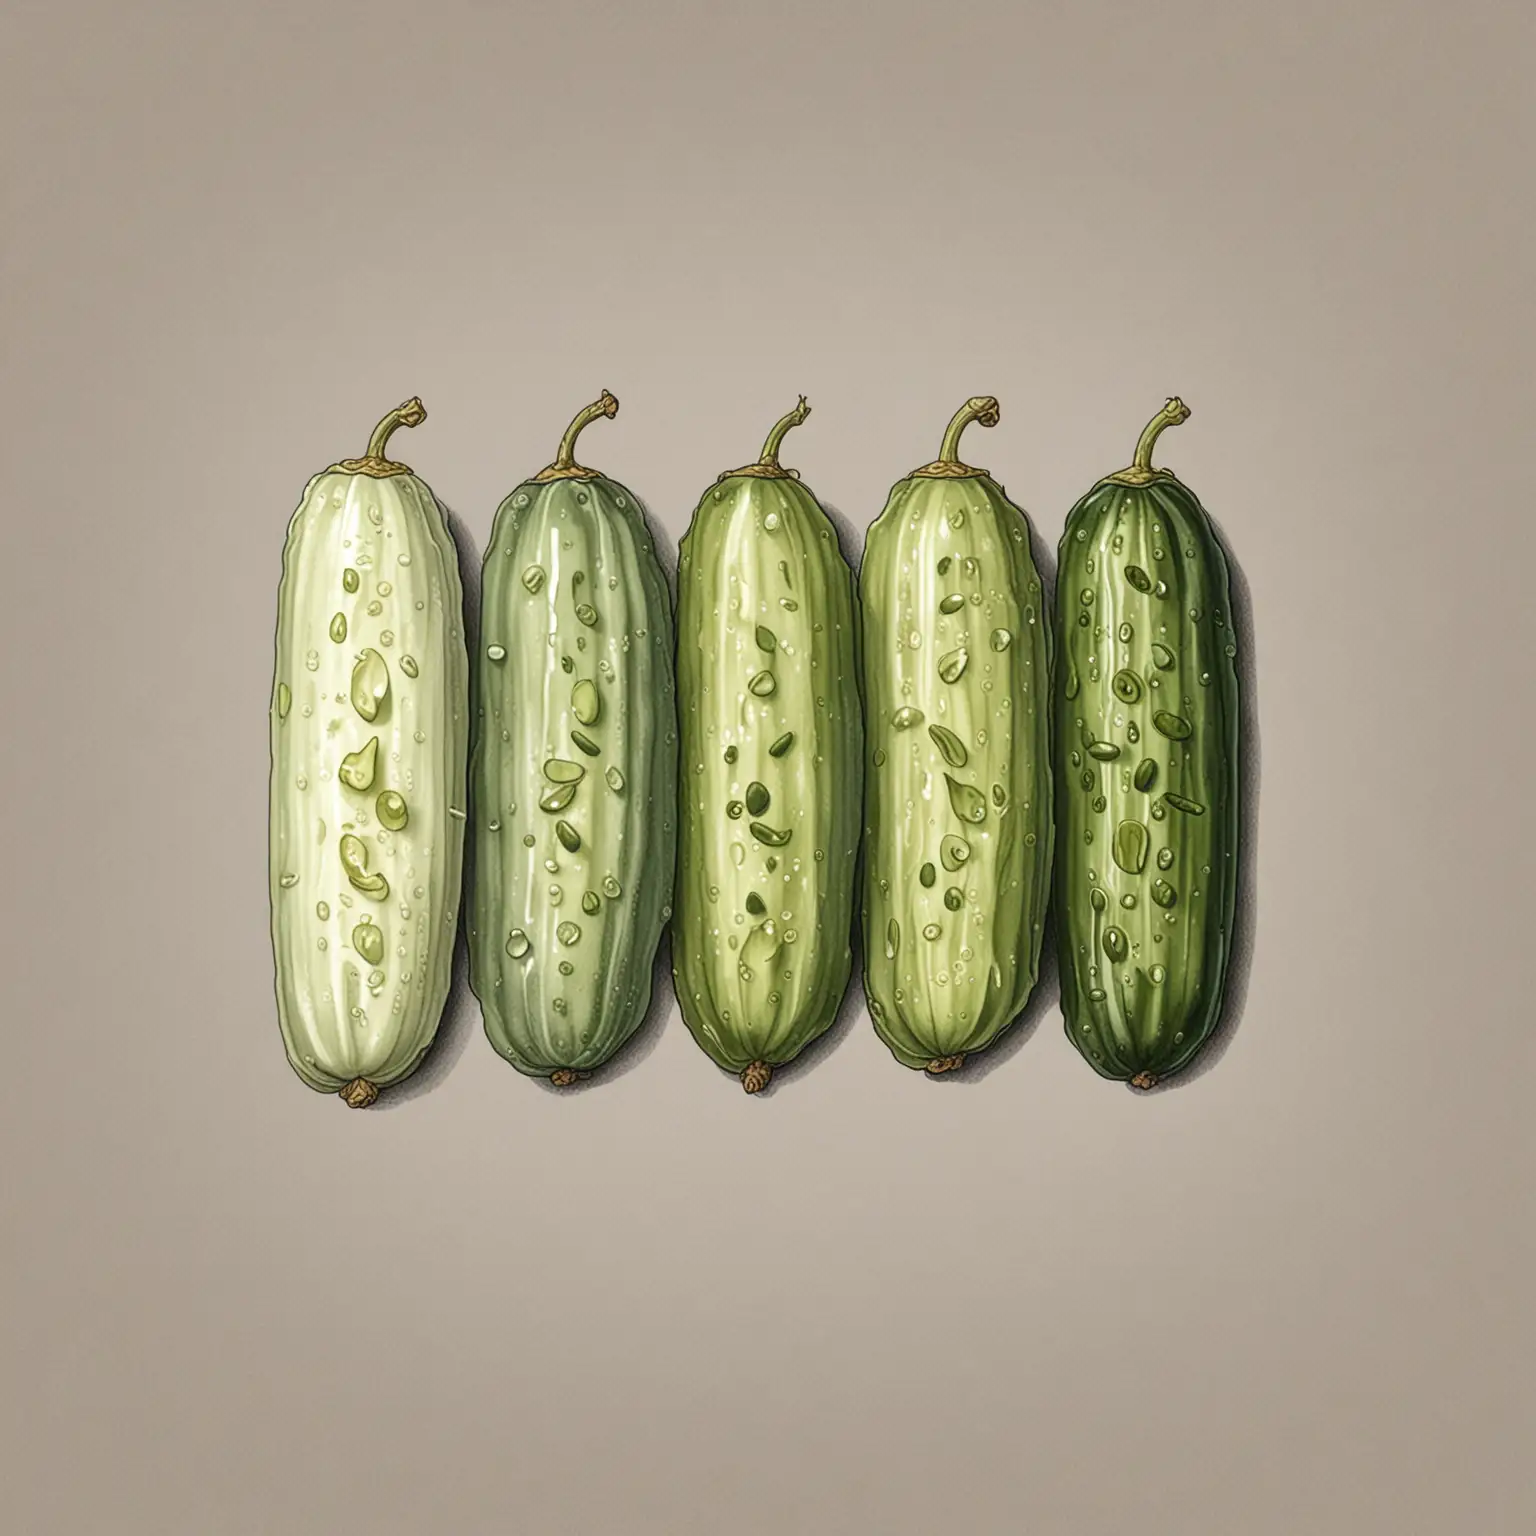 color line drawing of 5 thin pickles in a line